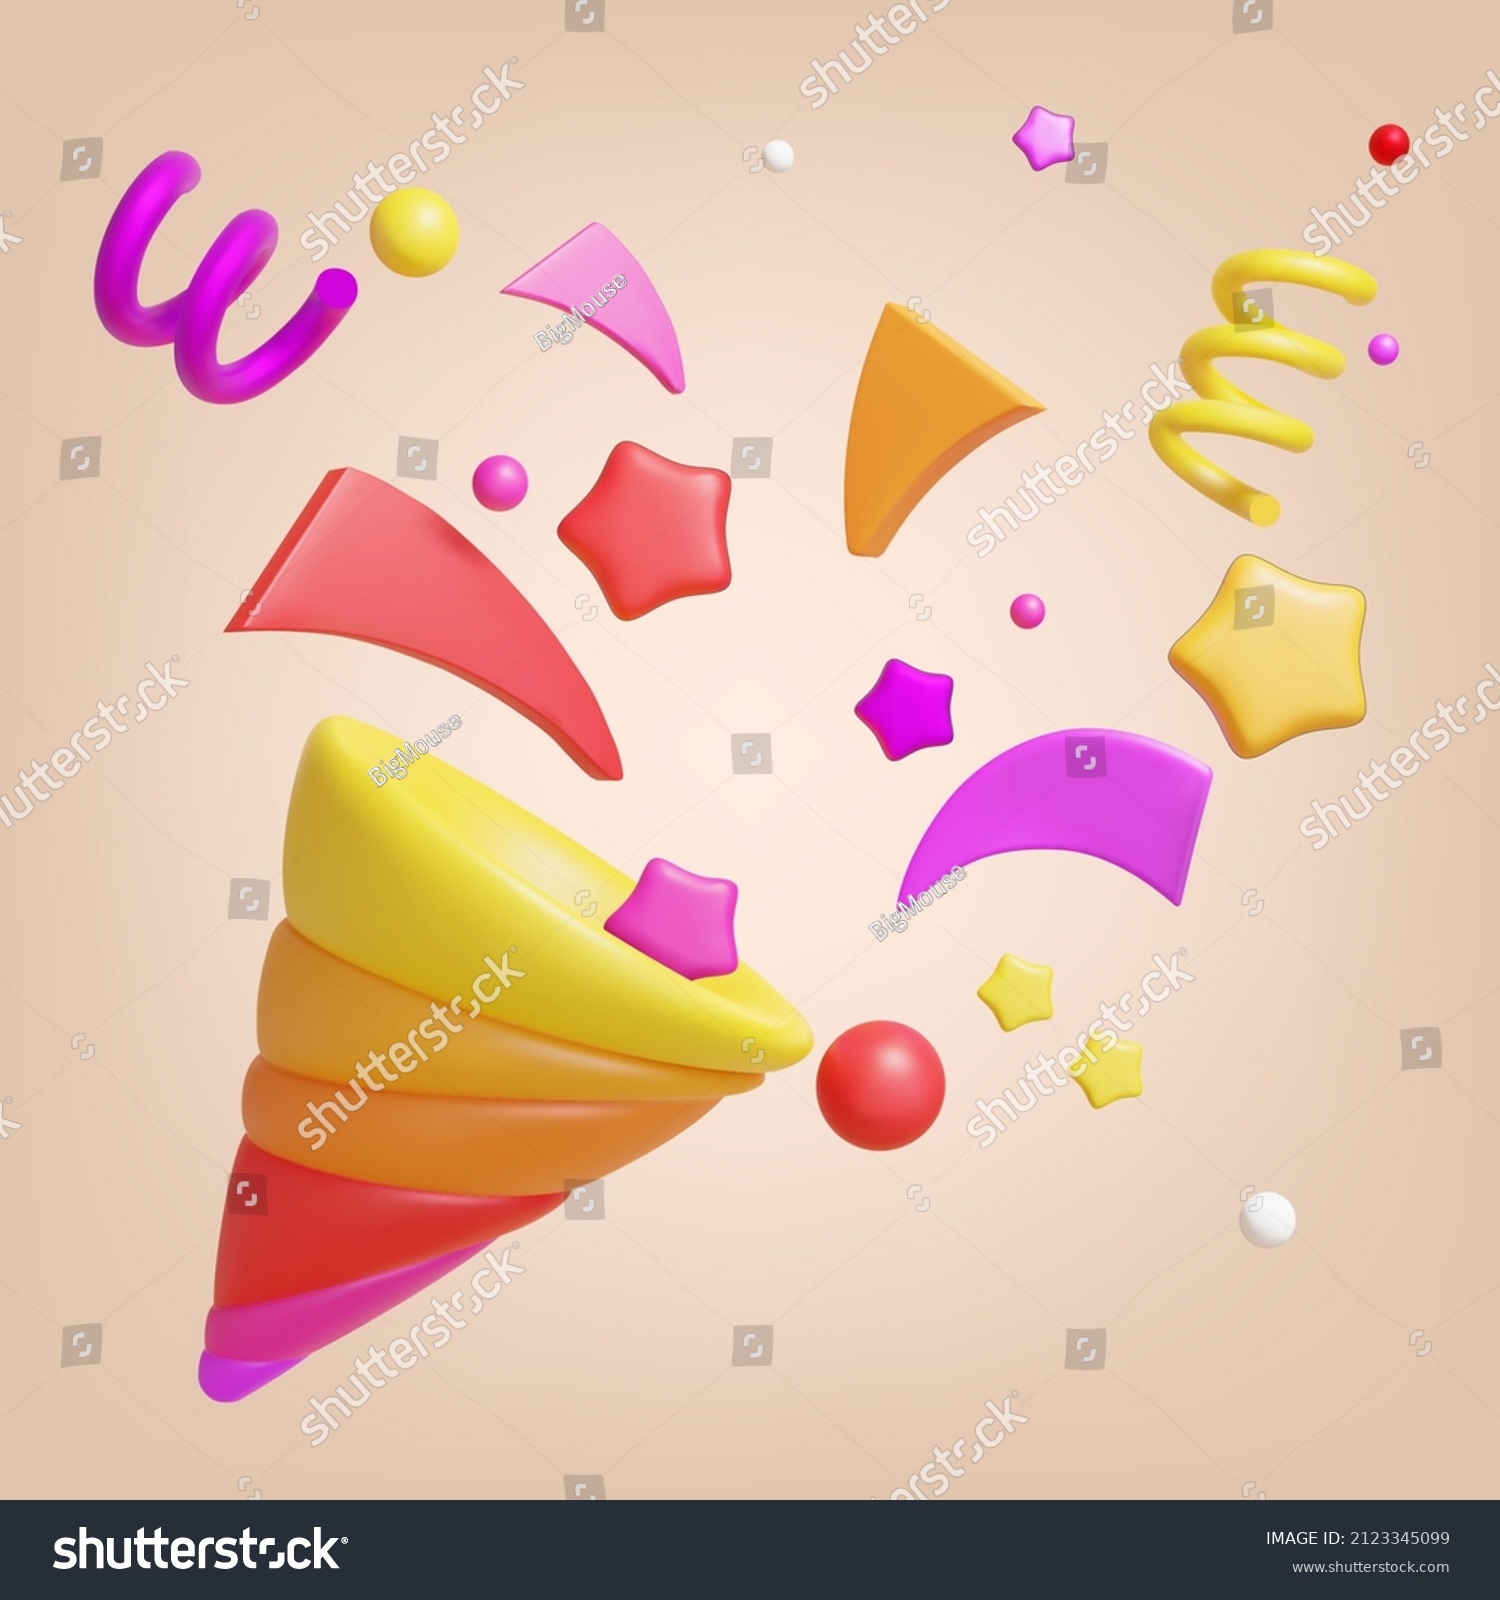 3d Party Popper with Confetti Plasticine Cartoon Style Symbol of Surprise. Vector illustration of Happy Birthday Cracker #2123345099